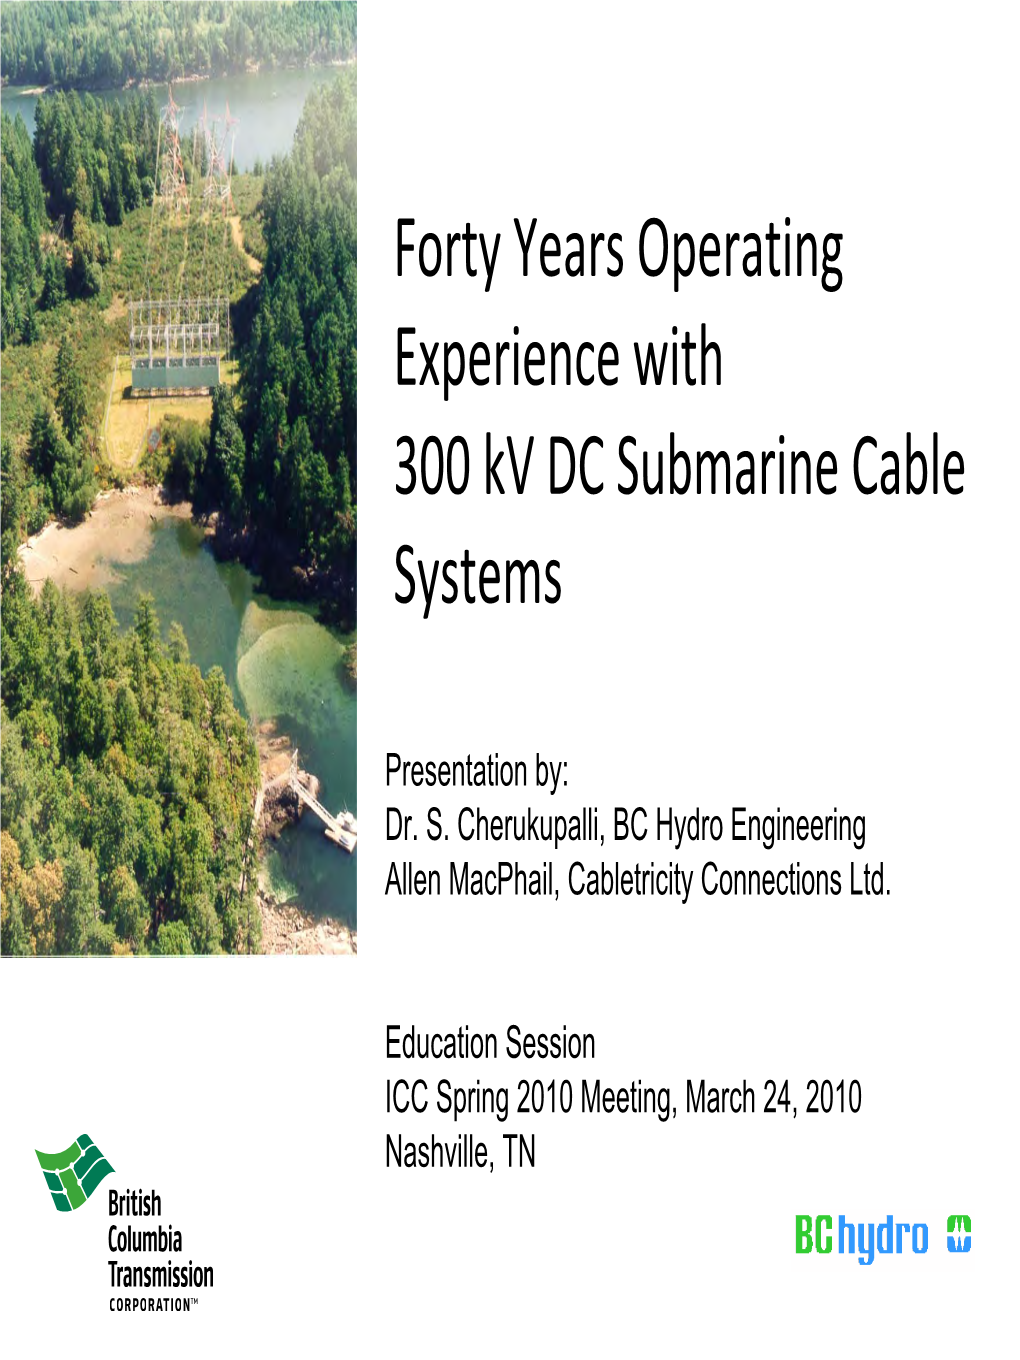 Utility Experience with HVDC Submarine Cables